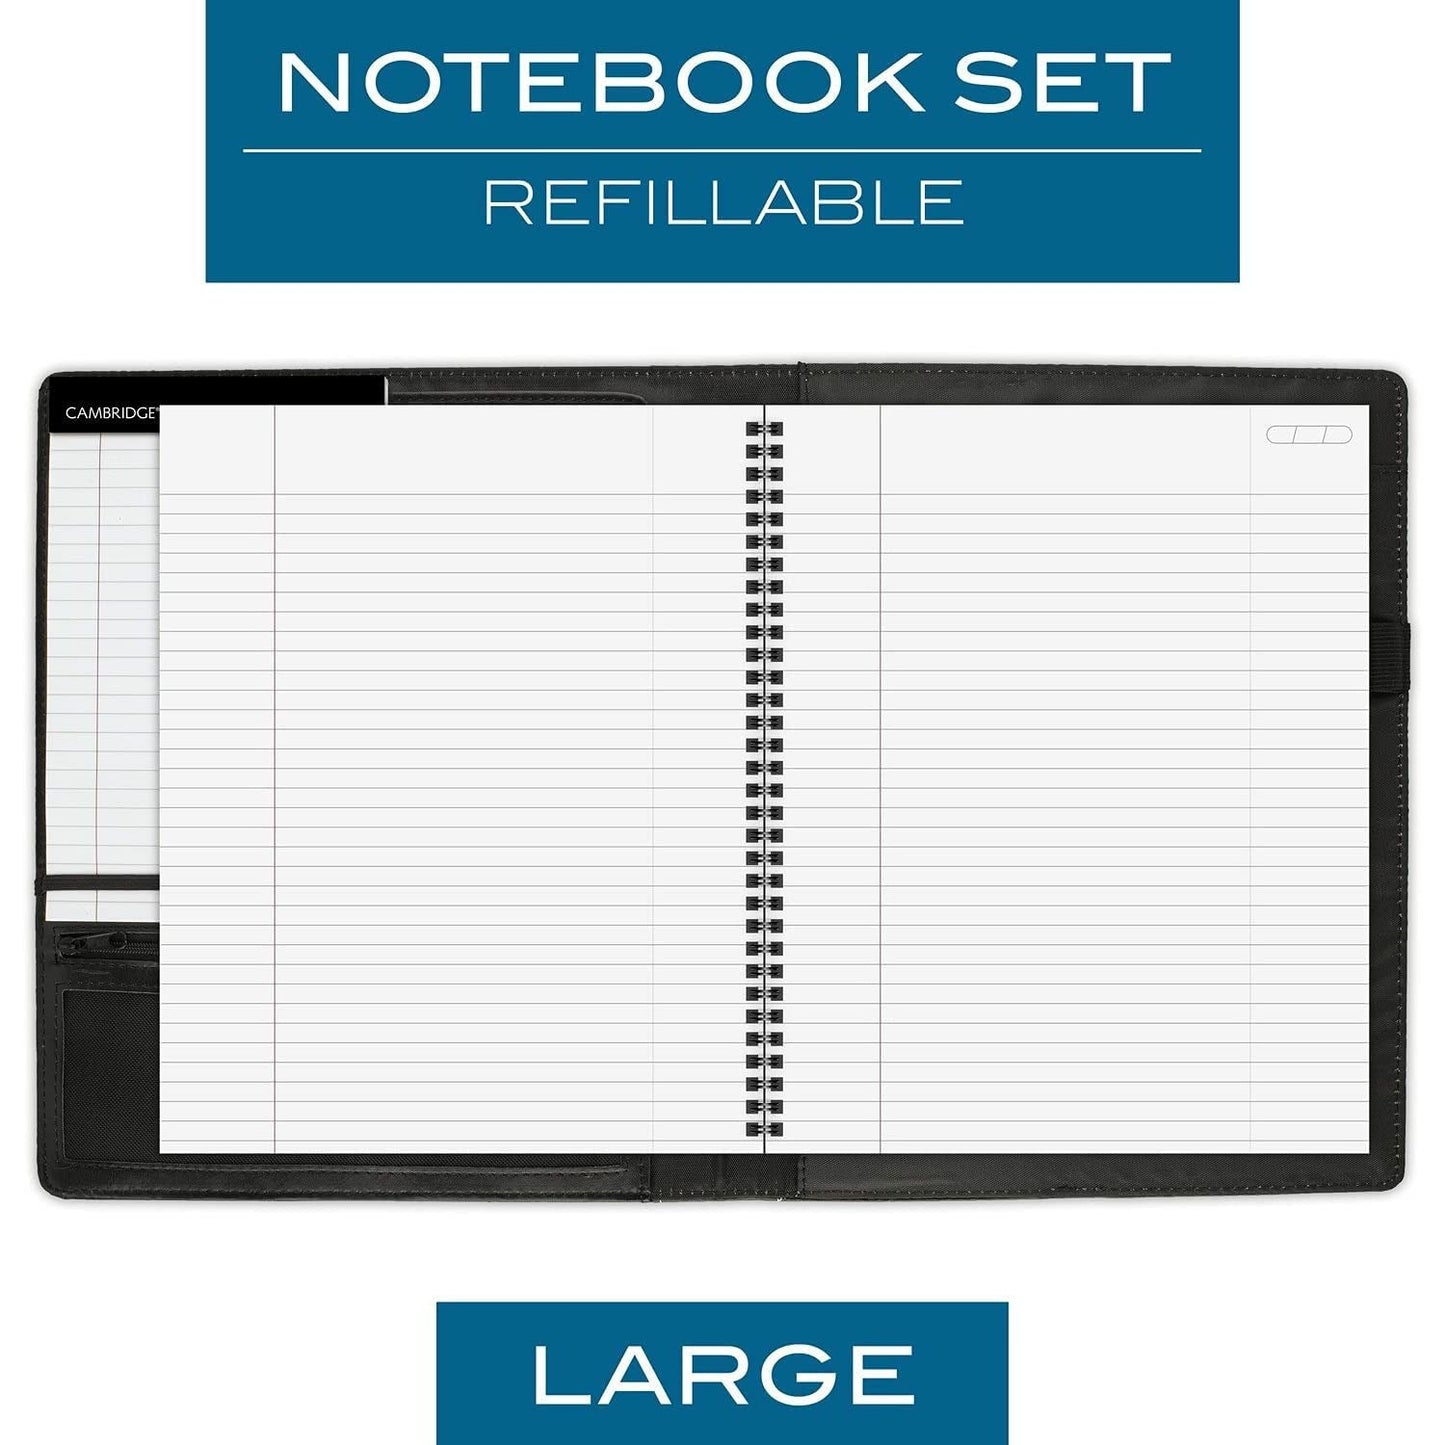 Mead Cambridge Business Notebook+ Pad with Leather Cover Sleeve - A4